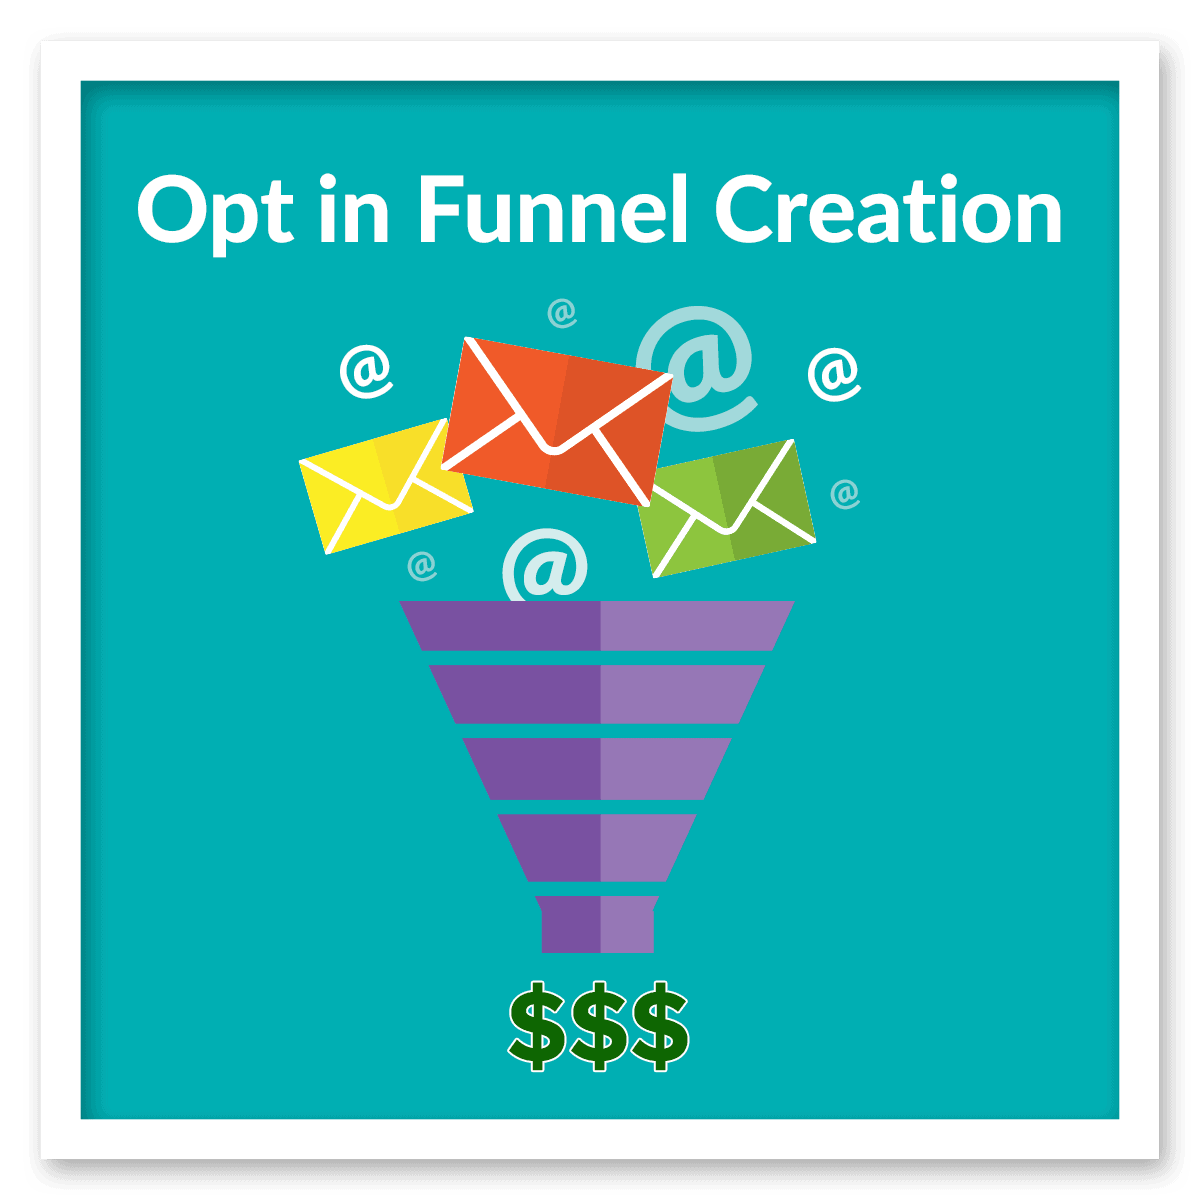 optinfunnel_squarewithtext